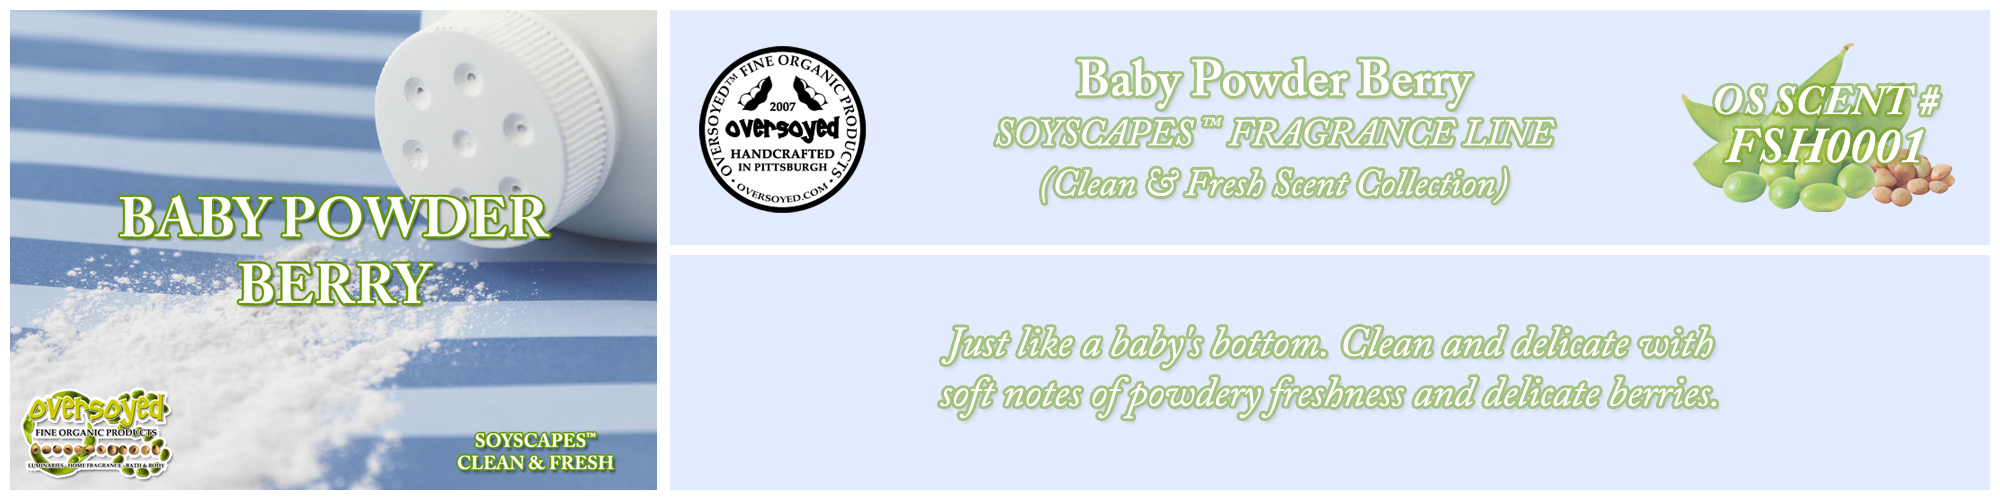 Baby Powder Berry Handcrafted Products Collection